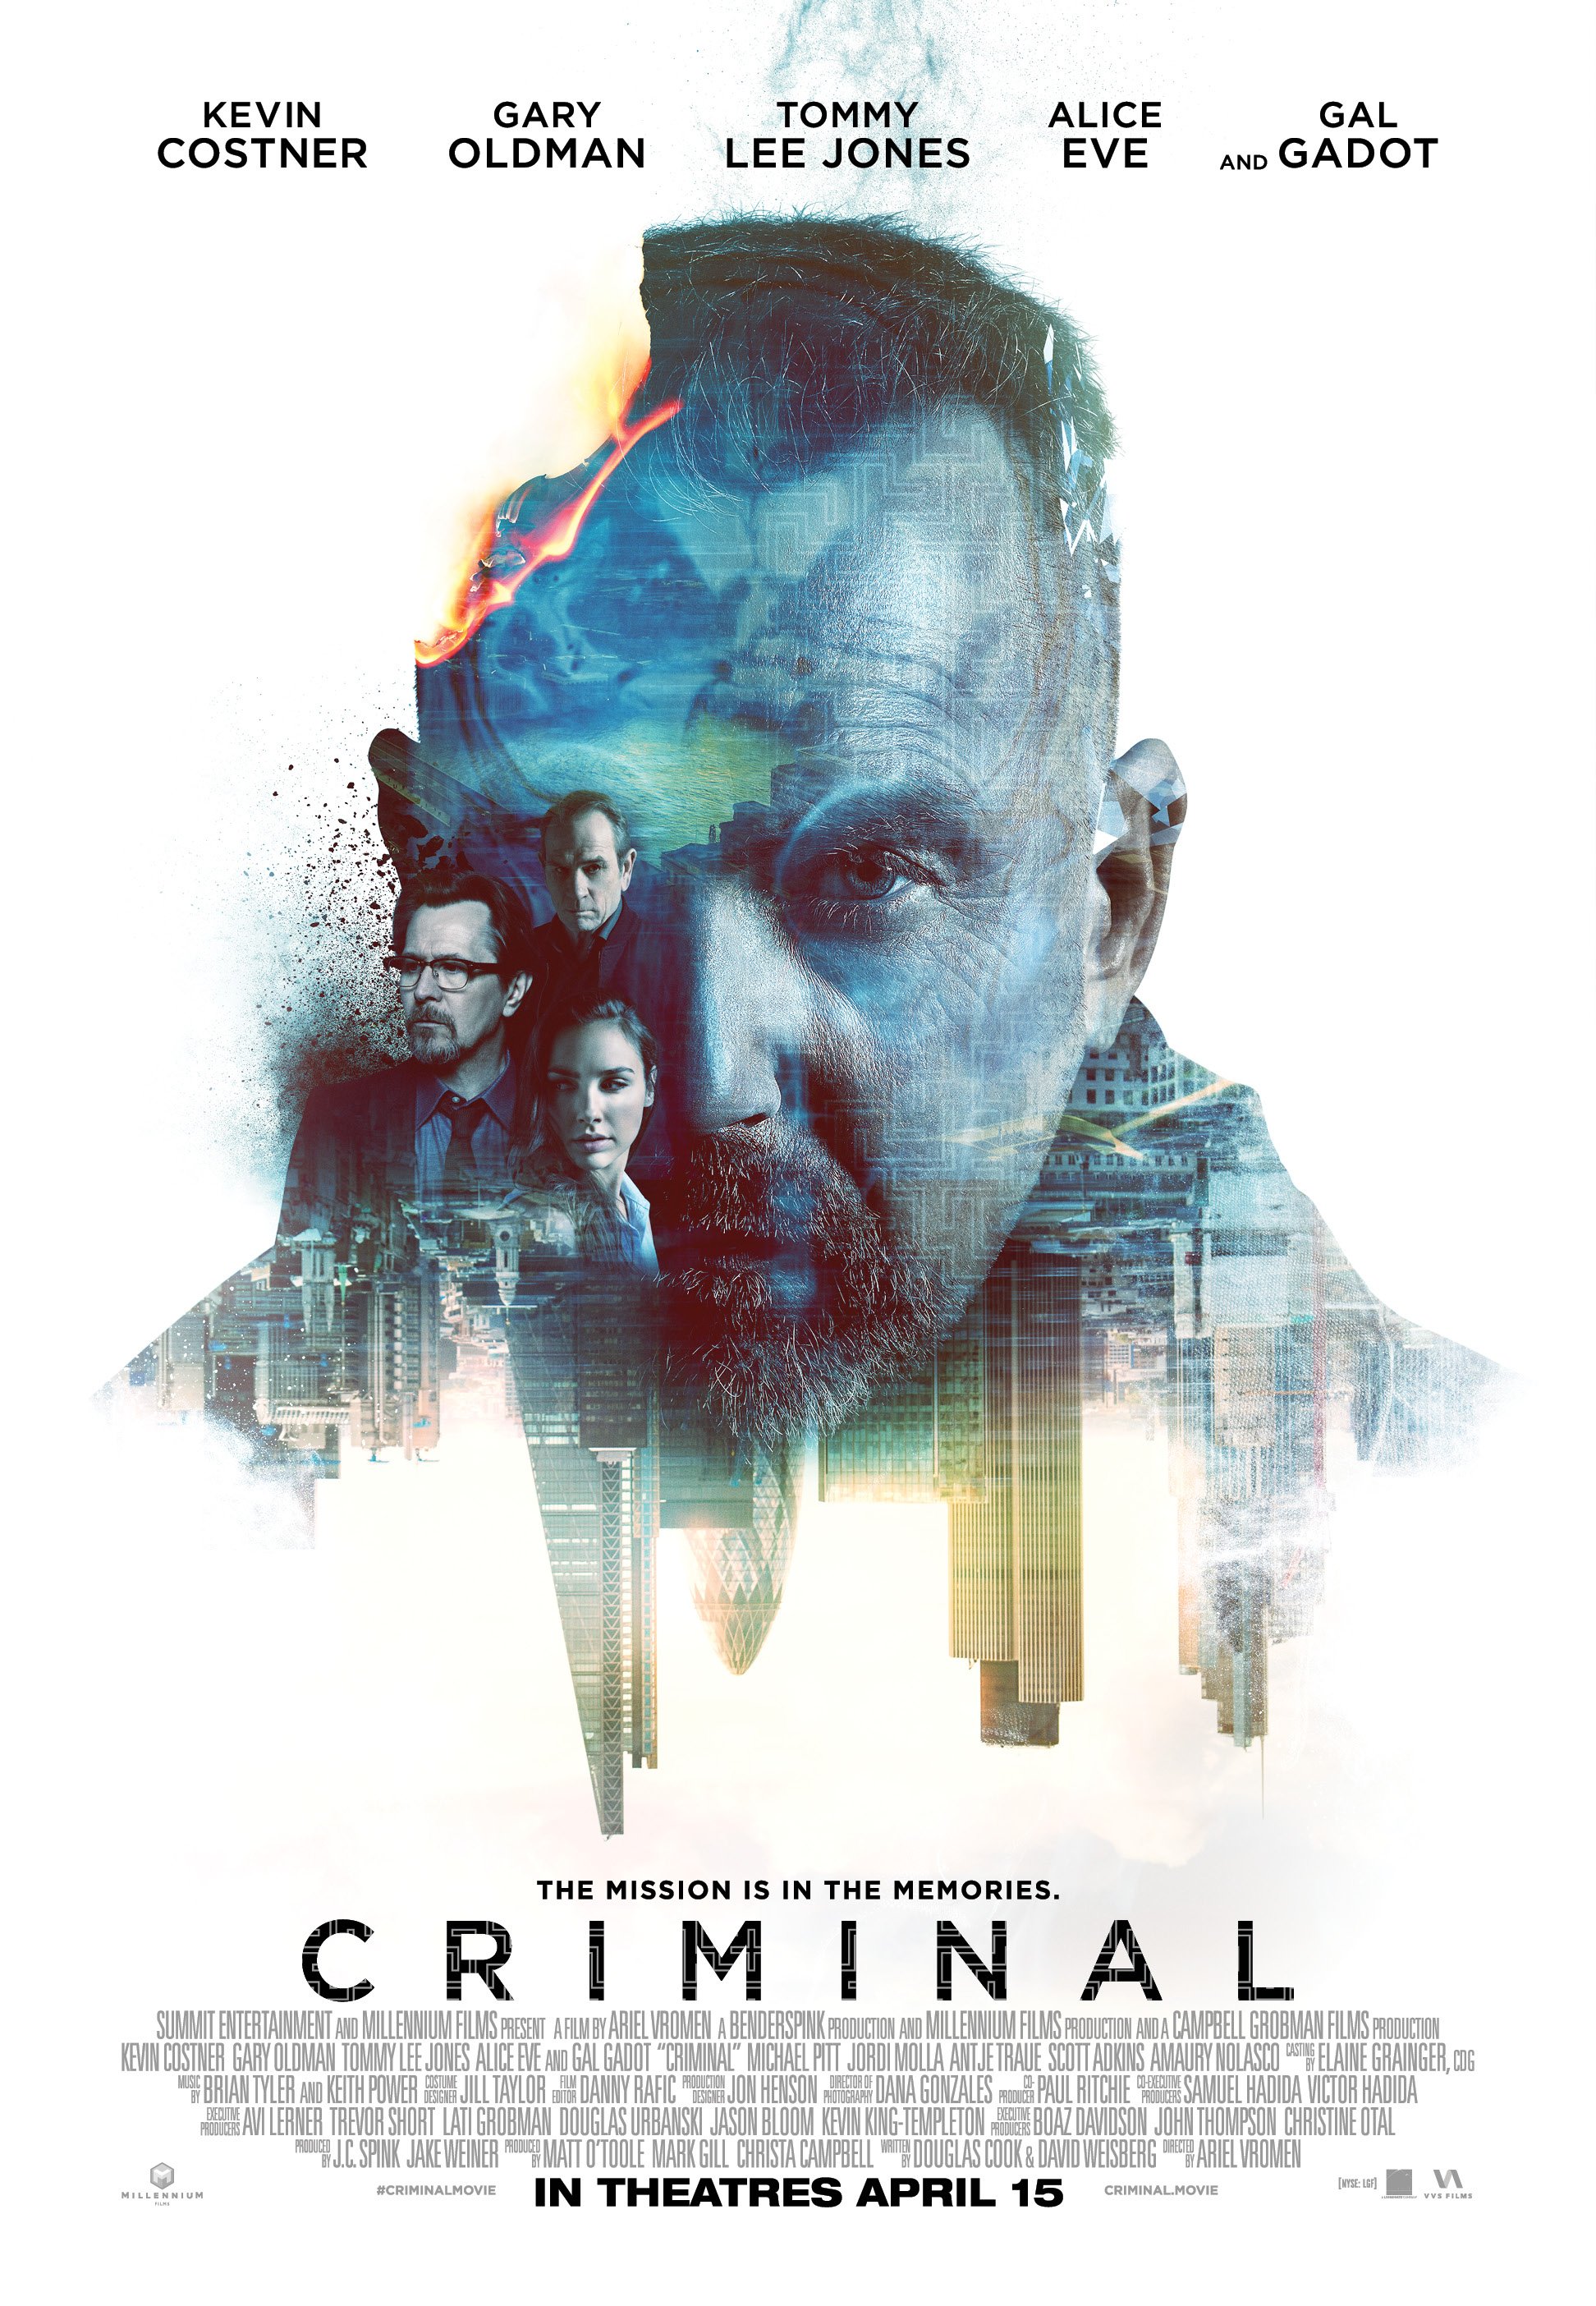 Poster of the movie Criminal